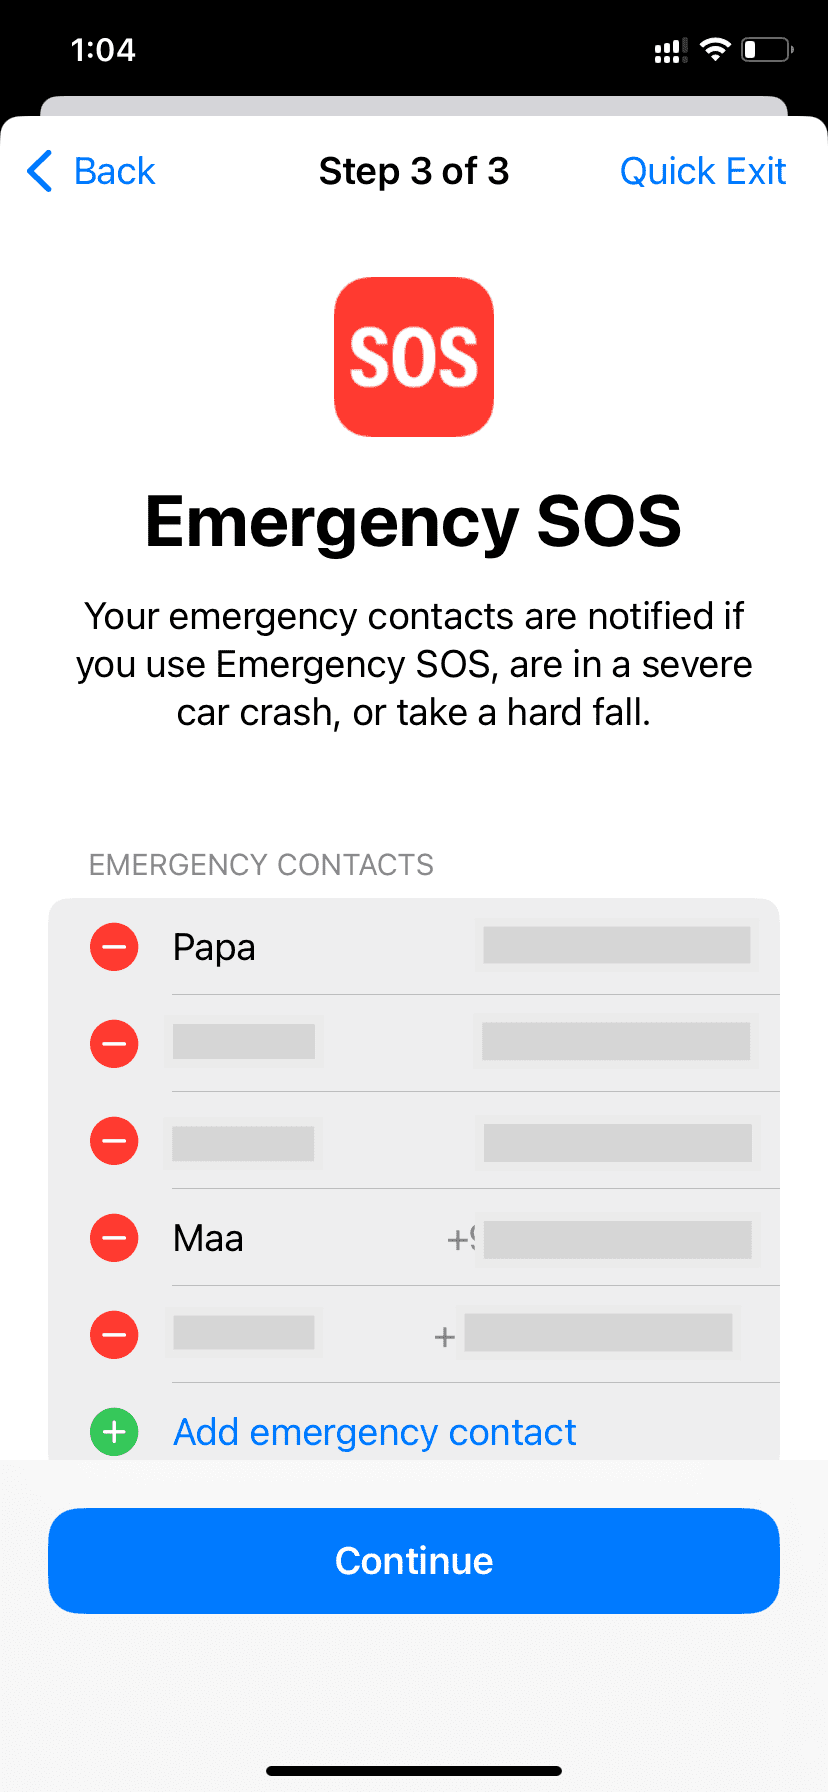 Review Emergency SOS contacts and their phone number during Safety Check